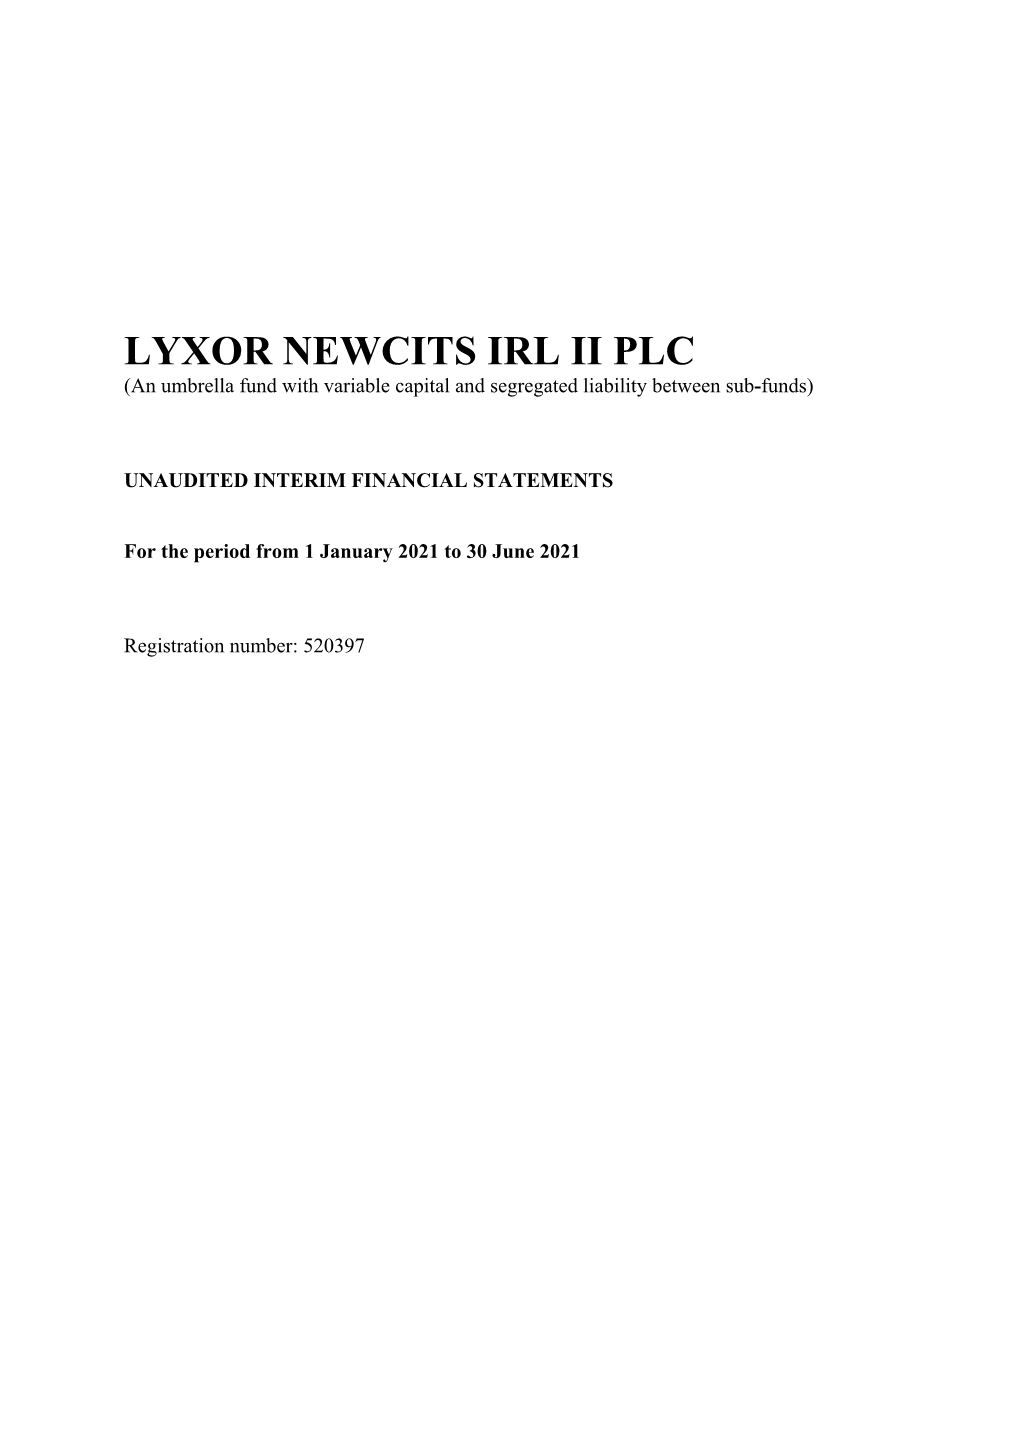 LYXOR NEWCITS IRL II PLC (An Umbrella Fund with Variable Capital and Segregated Liability Between Sub-Funds)